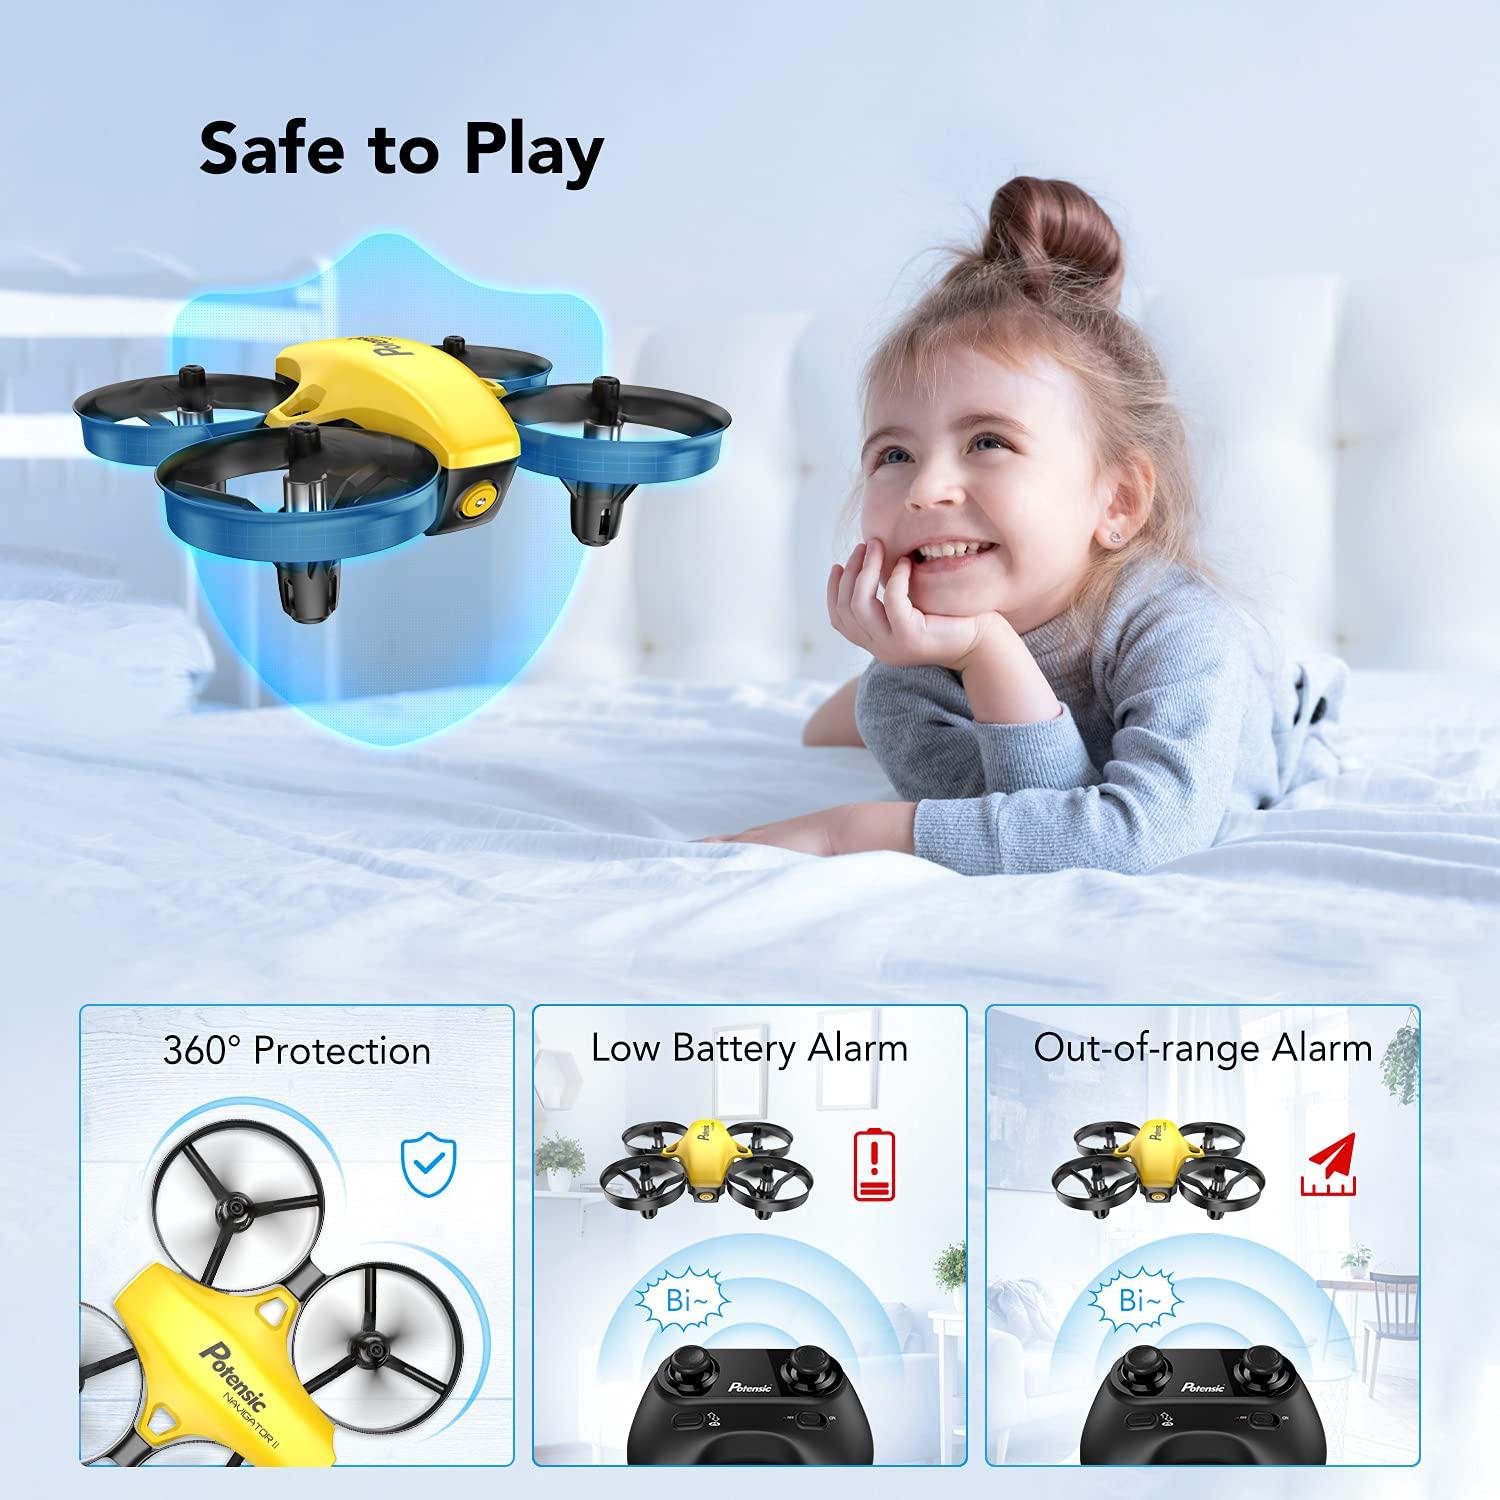 Remote Control Helicopter From Amazon:  Short subheading: Evaluating Value: Potensic A20W Mini Drone from Amazon